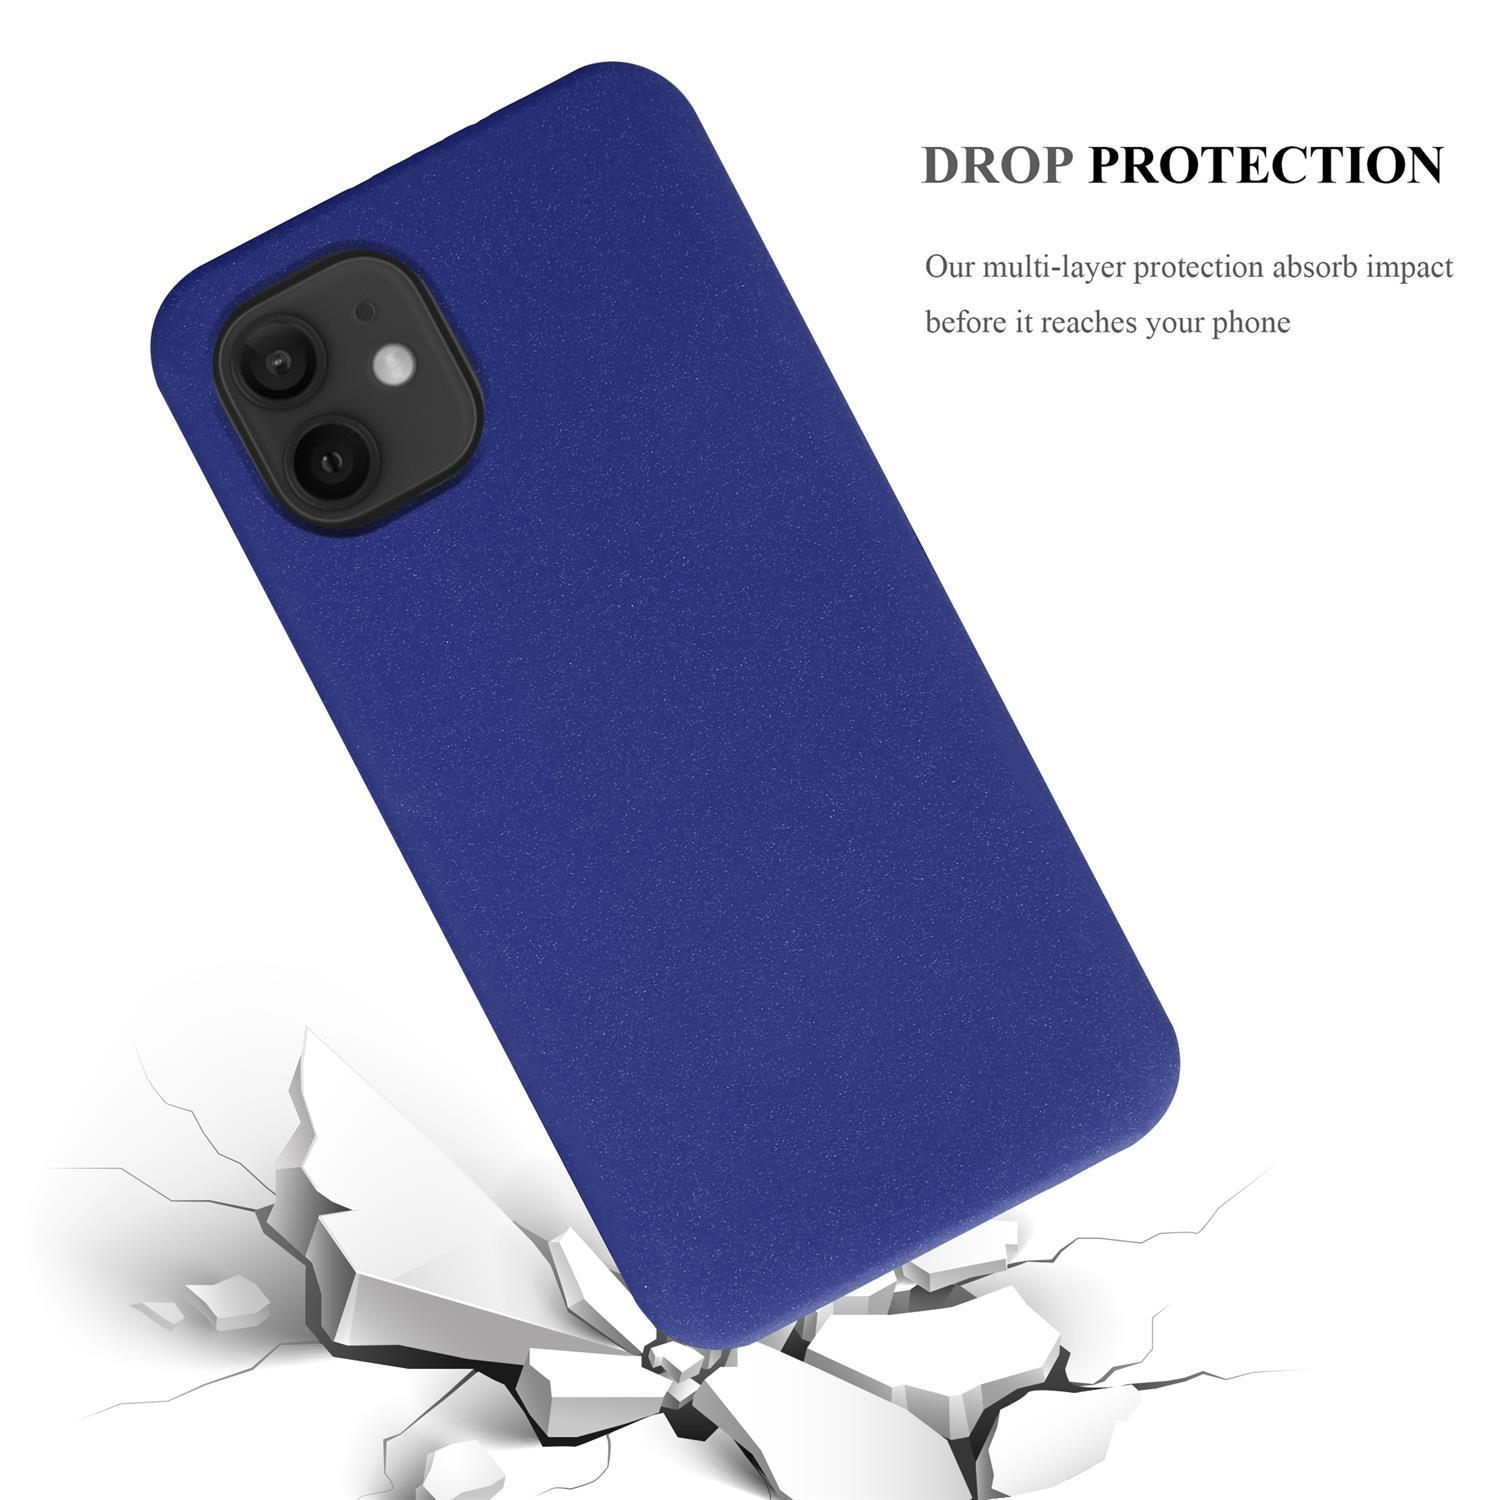 Apple, BLAU MAX, PRO iPhone CADORABO FROST Frosted Schutzhülle, 12 TPU DUNKEL Backcover,